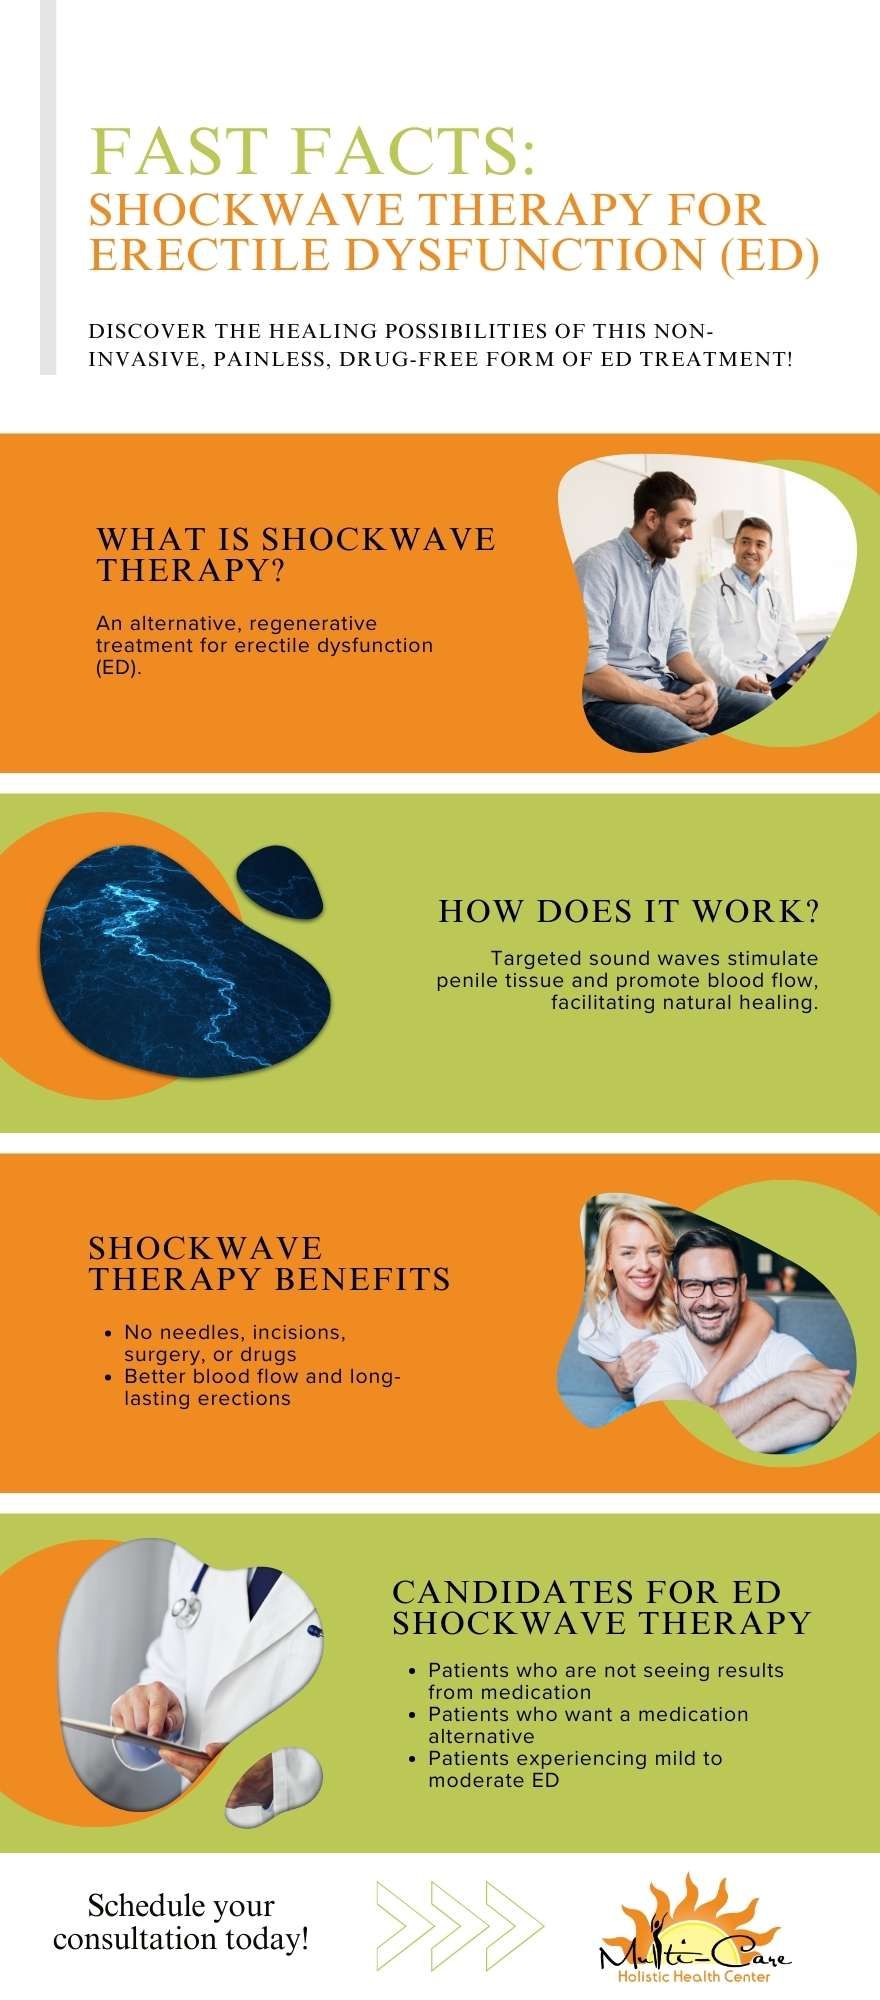 M37067 - Dec 2023 Infographic - Shockwave Therapy for Erectile Dysfunction (ED).jpg